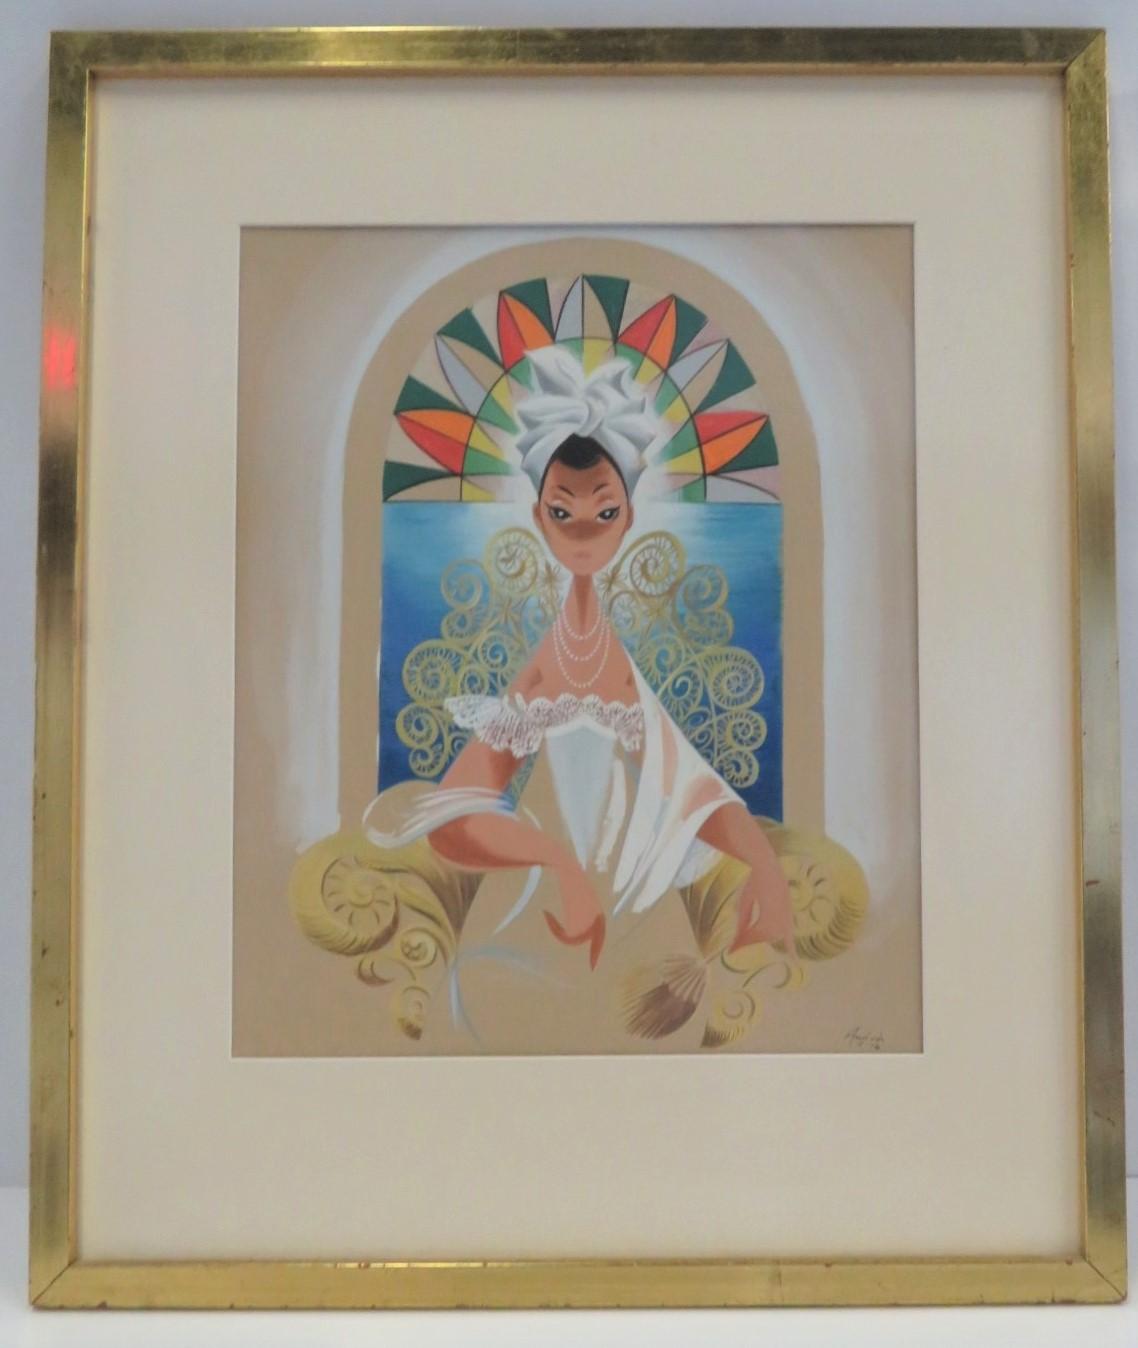 REDUCED FROM $2,500....Original gouache painting by Andrés ( García Benítez) (1926-1981), a Cuban painter well known for creating covers for Carteles, a prestigious weekly magazine in Havana.  The painting depicts a beautiful young woman wearing an